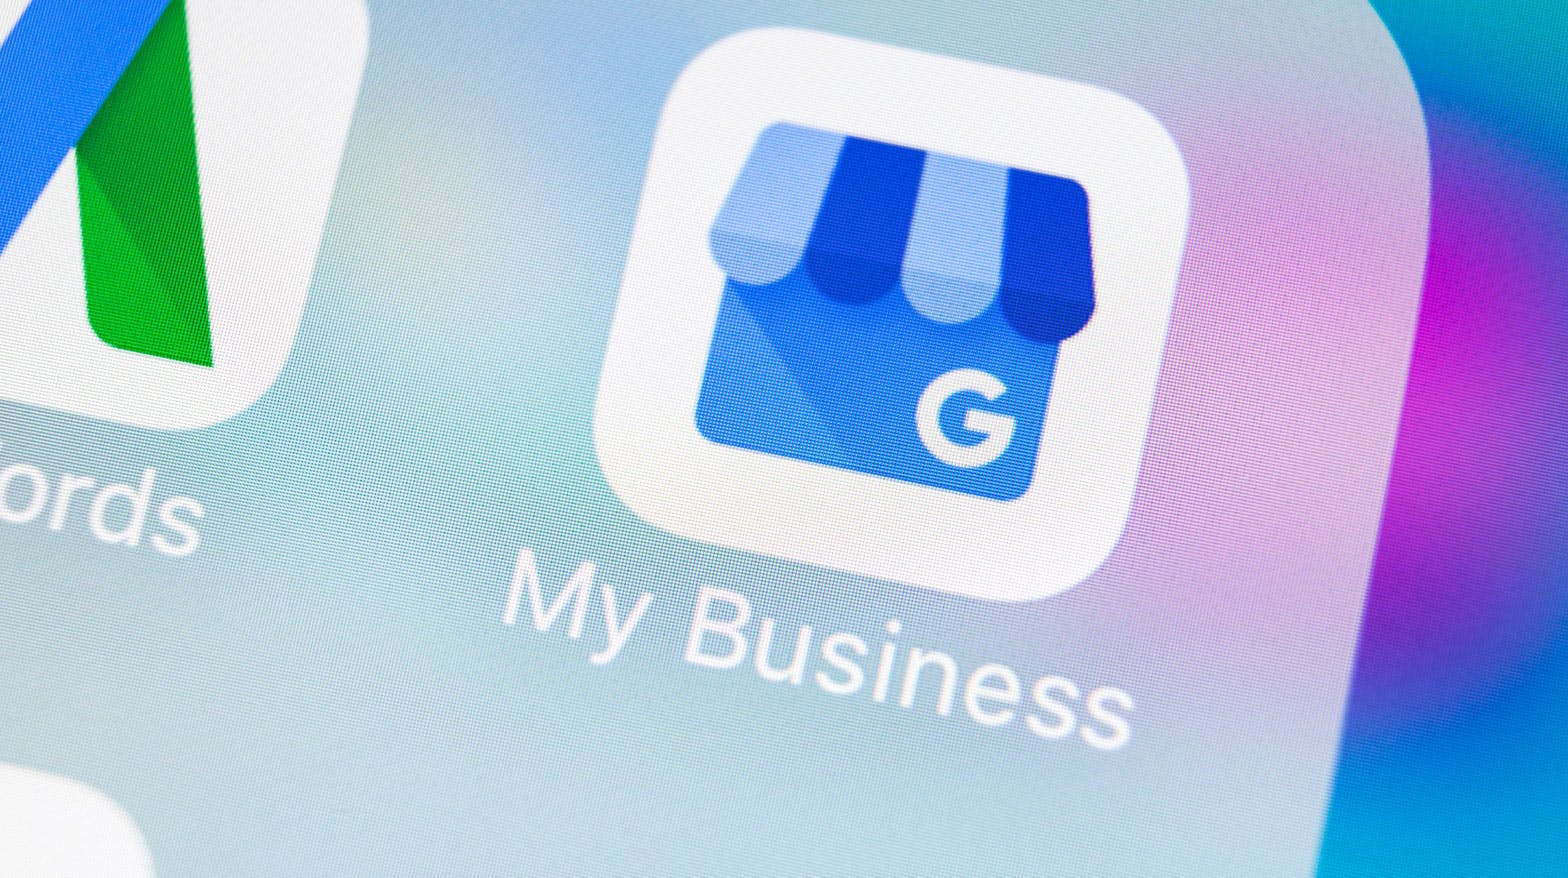 Register your business on Google with Google My Business Insight